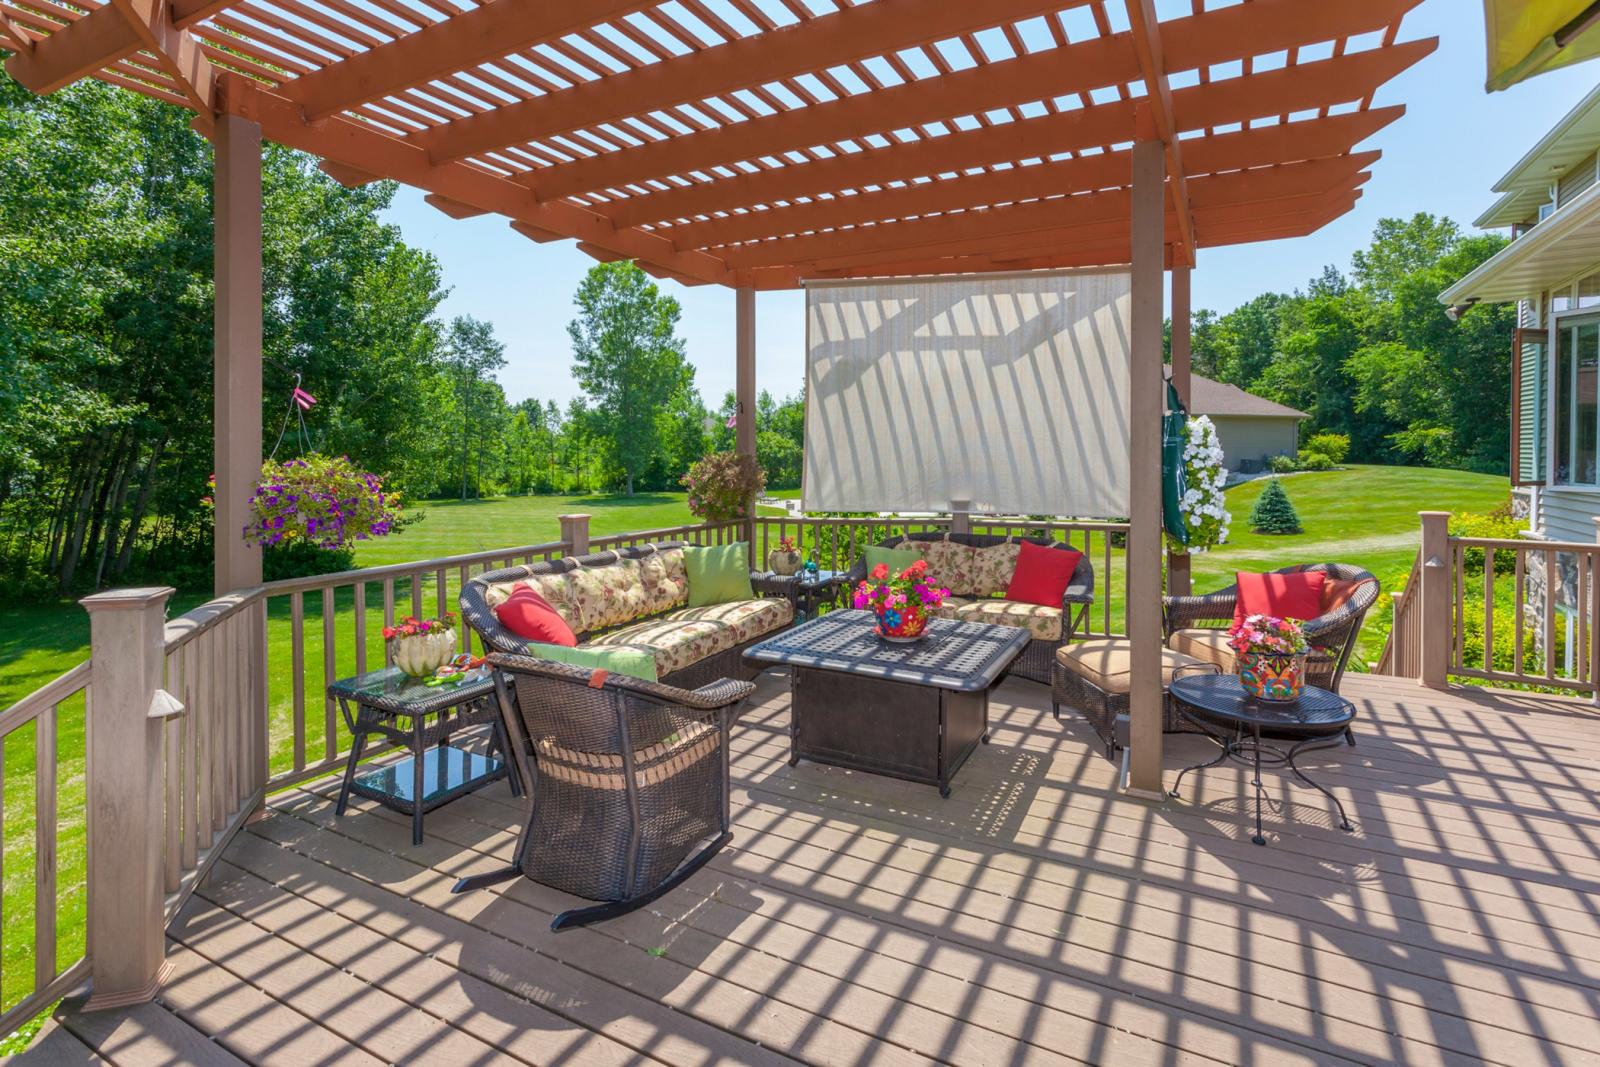 add a new deck to your home to add value